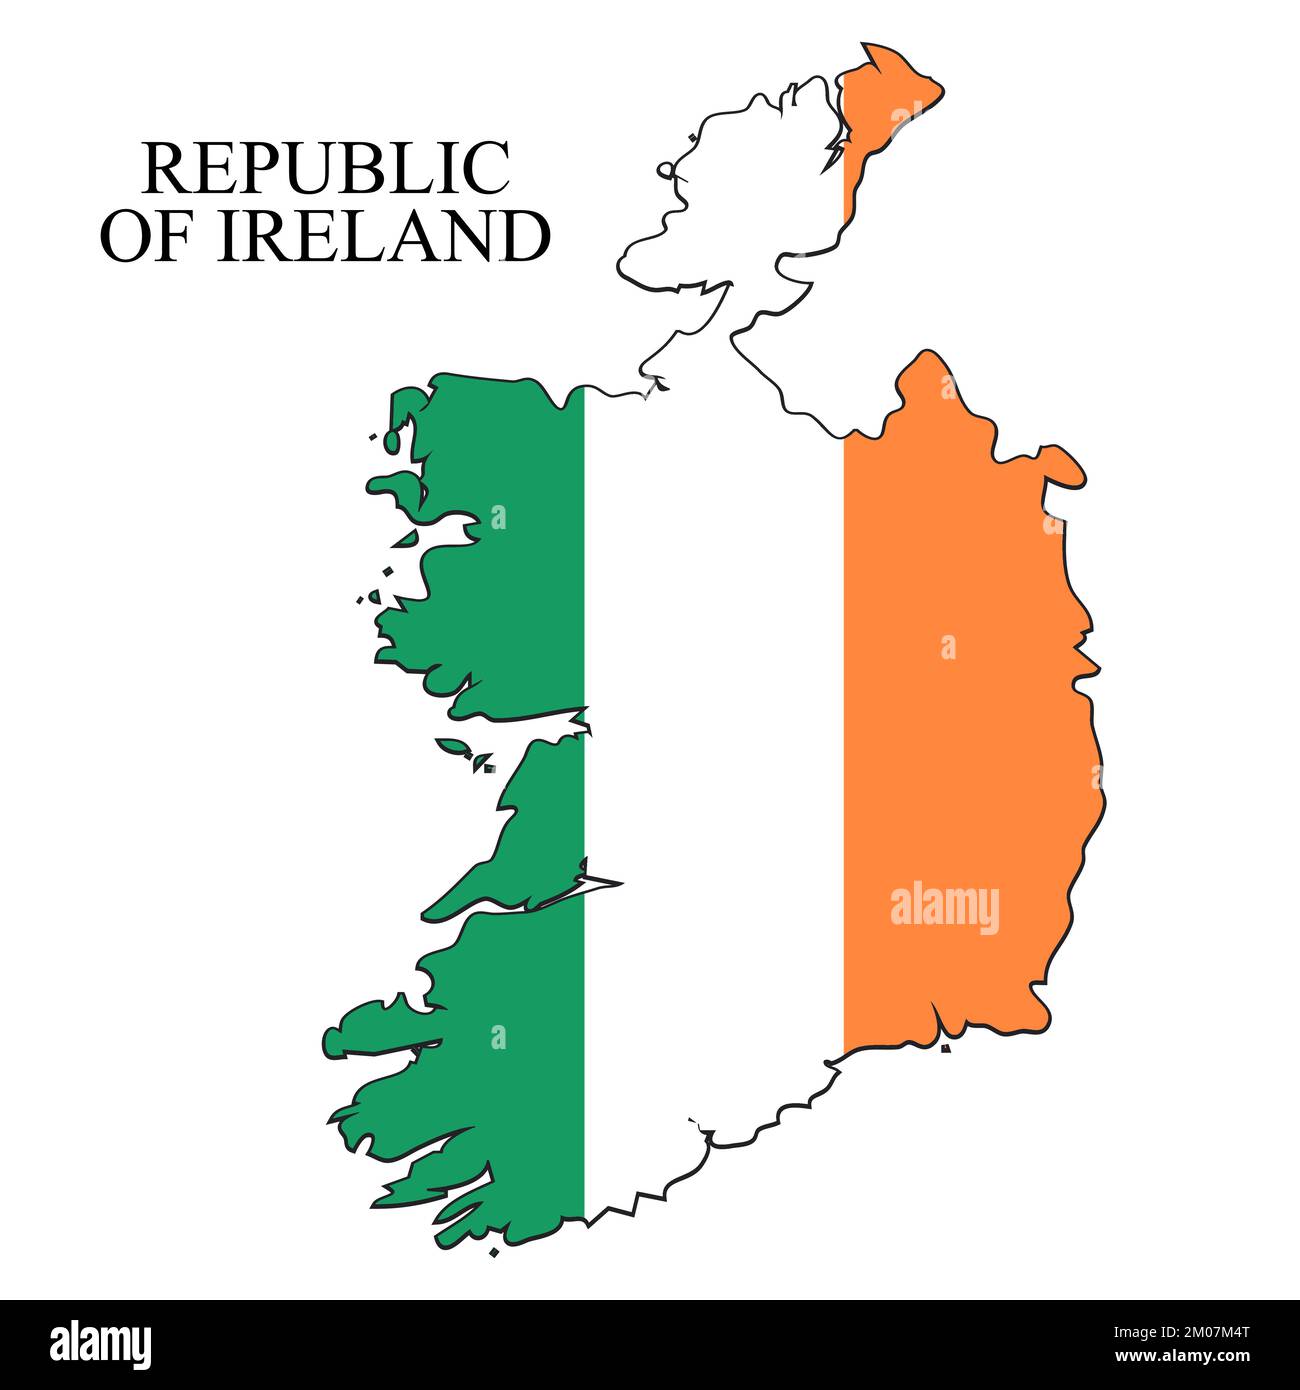 Republic of Ireland map vector illustration. Global economy. Famous country. Northern Europe. Europe. Stock Vector